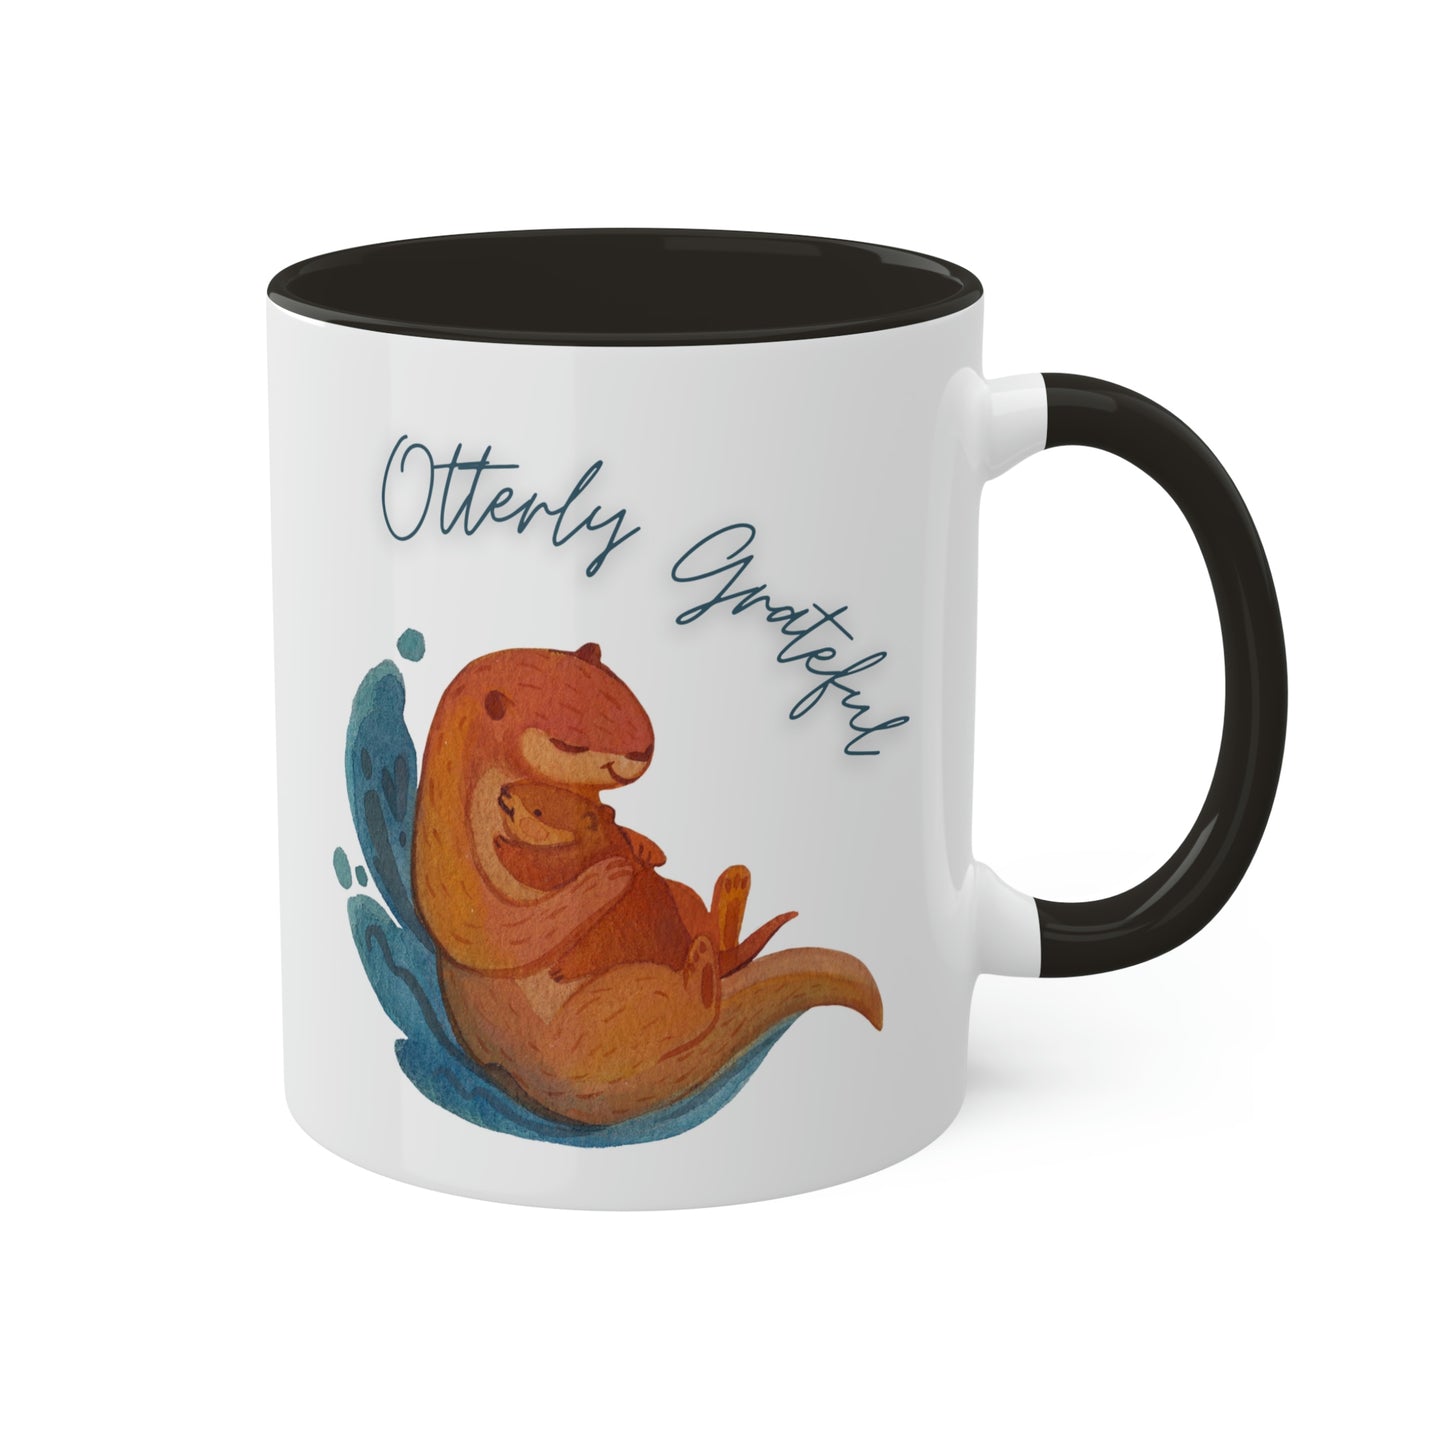 Otterly Grateful, Otter and baby, mom gift, dad gift, caregiver gift, color options Mug